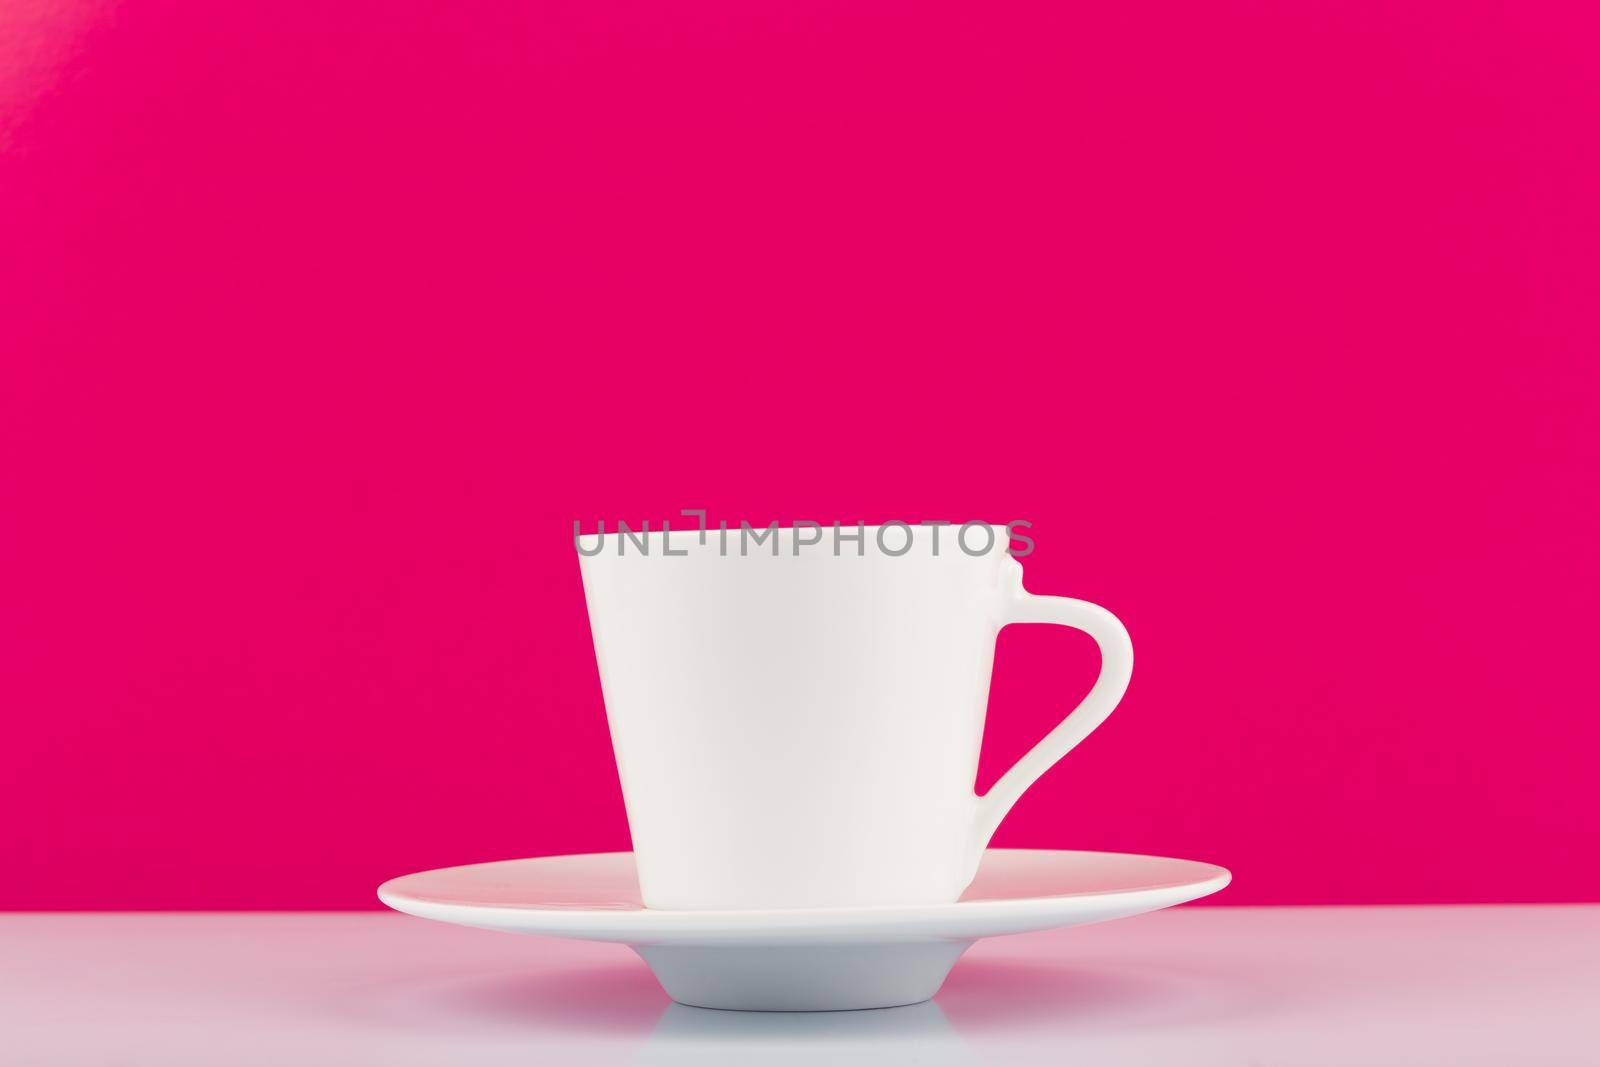 White ceramic coffee cup with saucer against pink background with copy space by Senorina_Irina